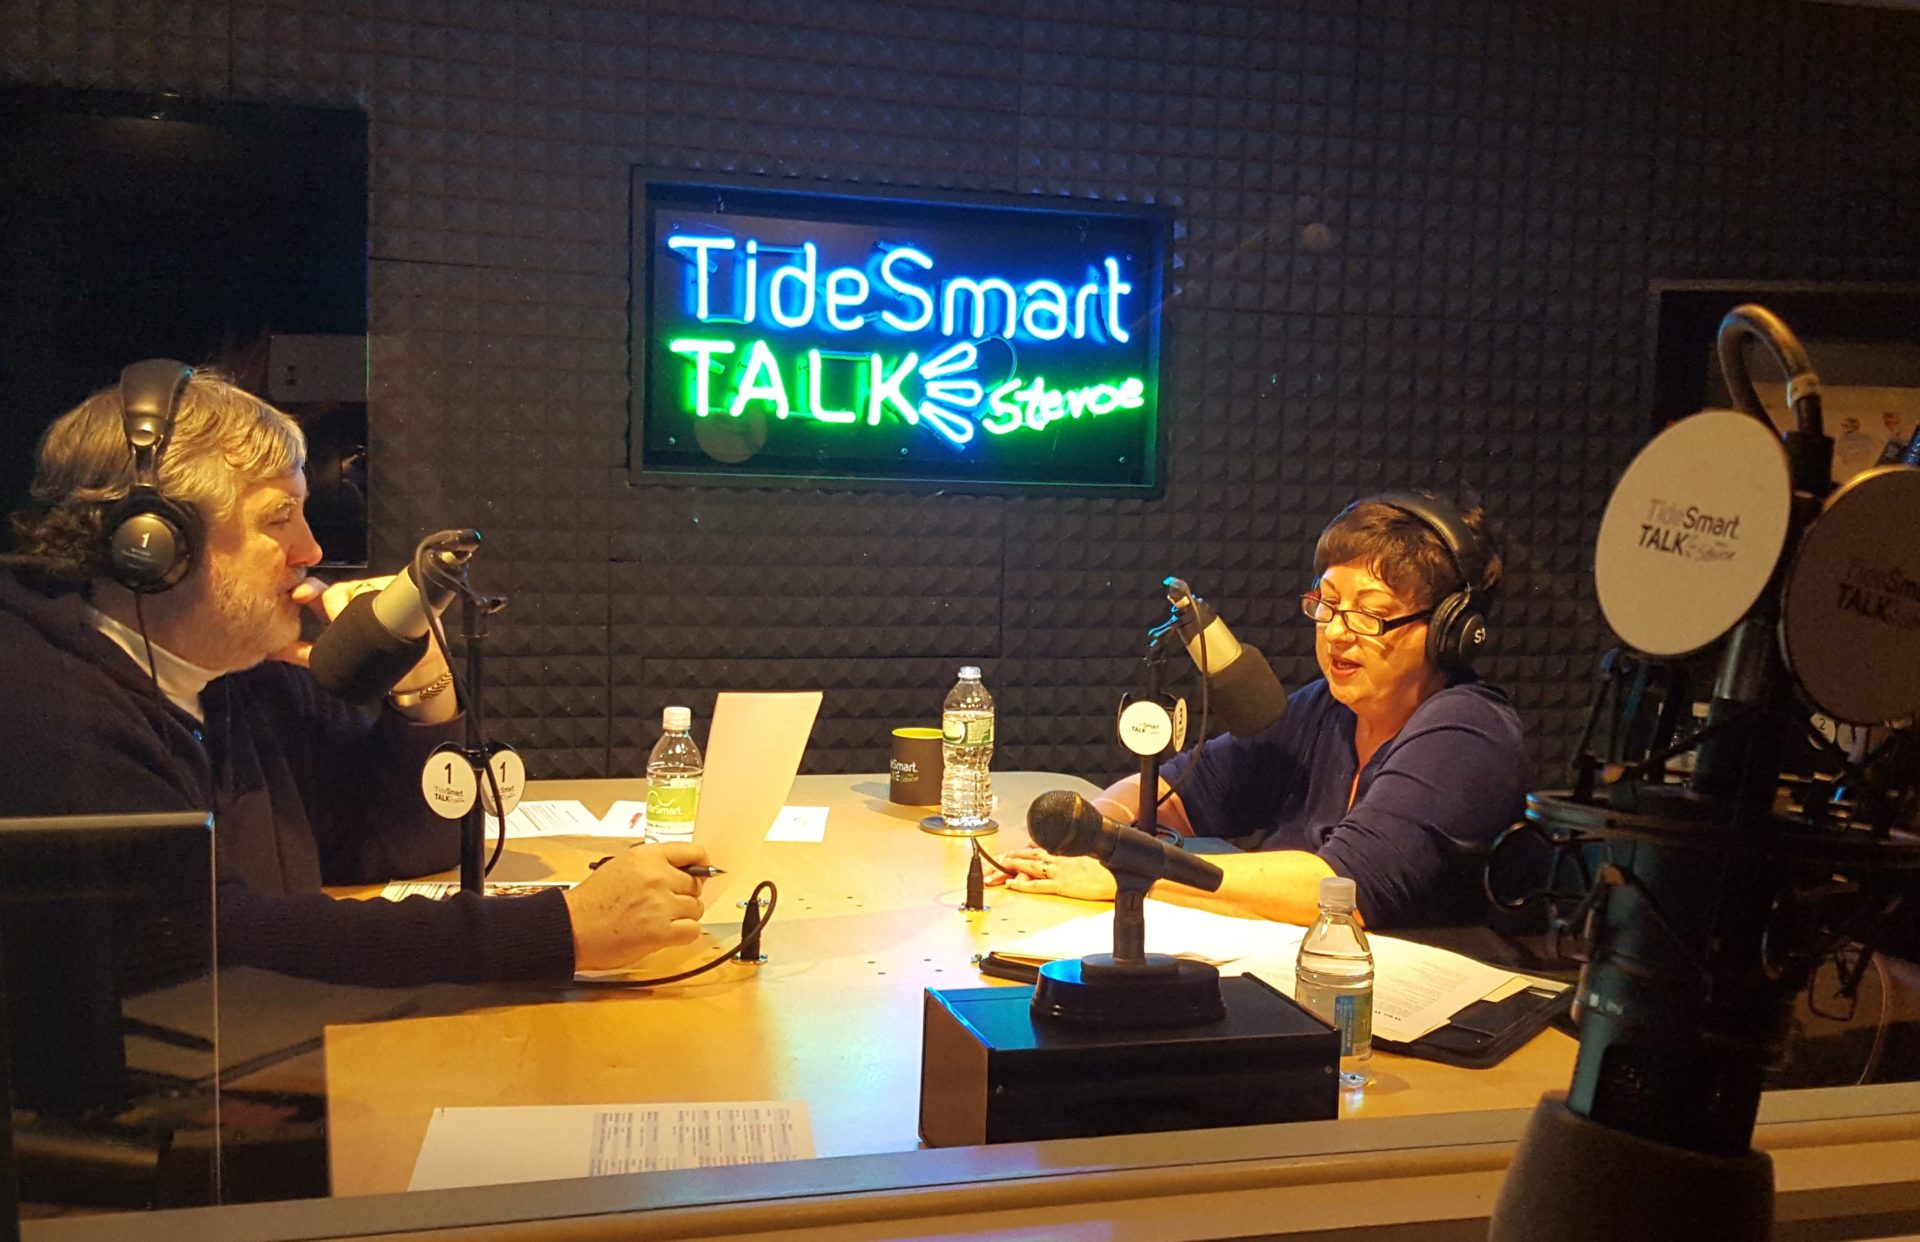 Host of TideSmart Talk with Stevoe, Steve Woods, welcomed CEO of Girl Scouts of Maine, Joanne Crepeau (at right).